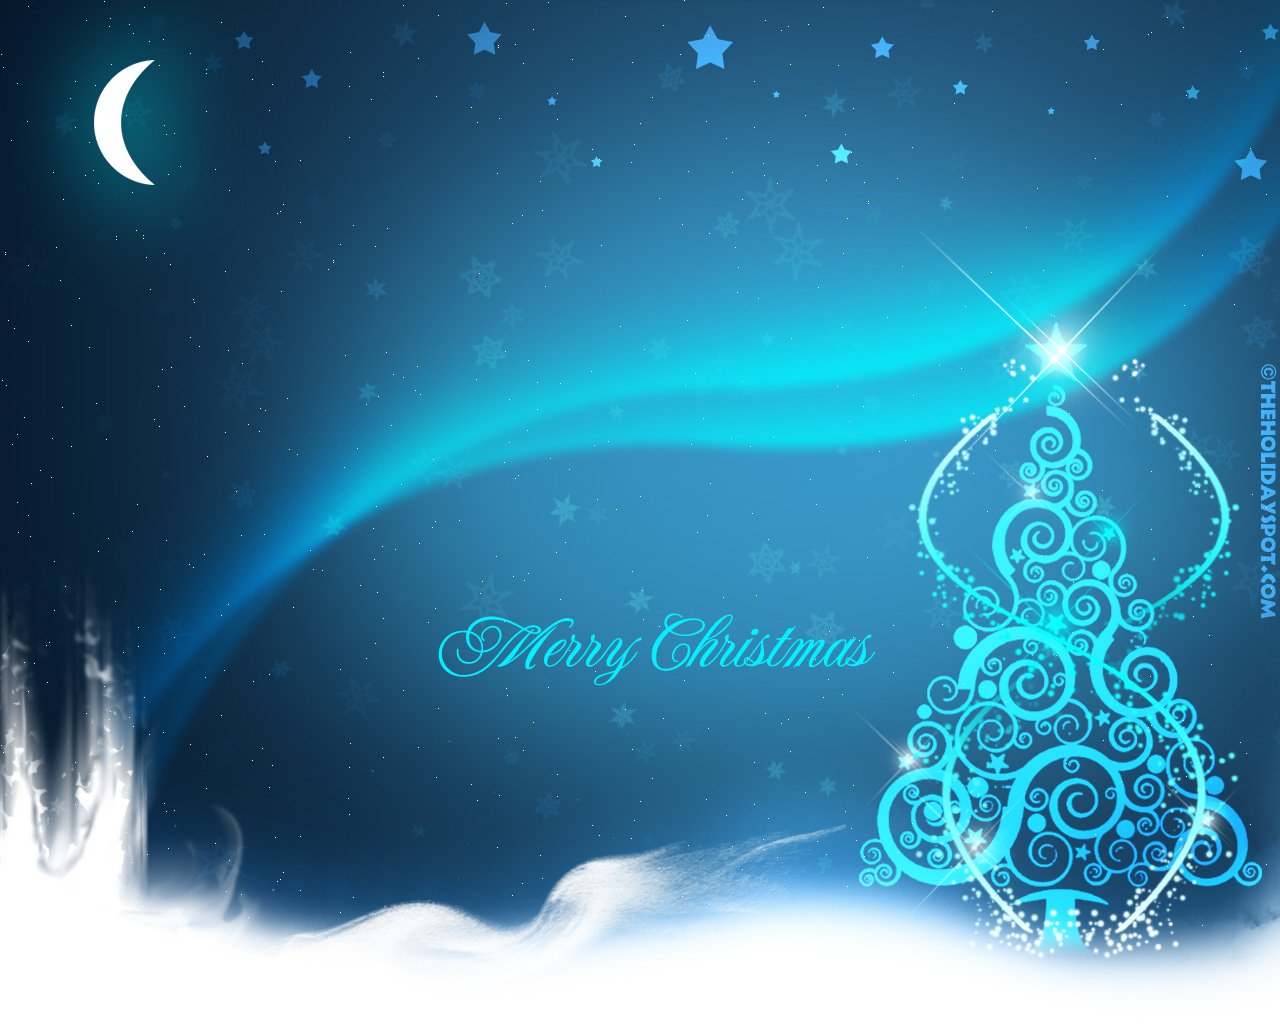 http://www.theholidayspot.com/christmas/wallpapers/new_images/high-definition-christmas-wallpaper.jpg